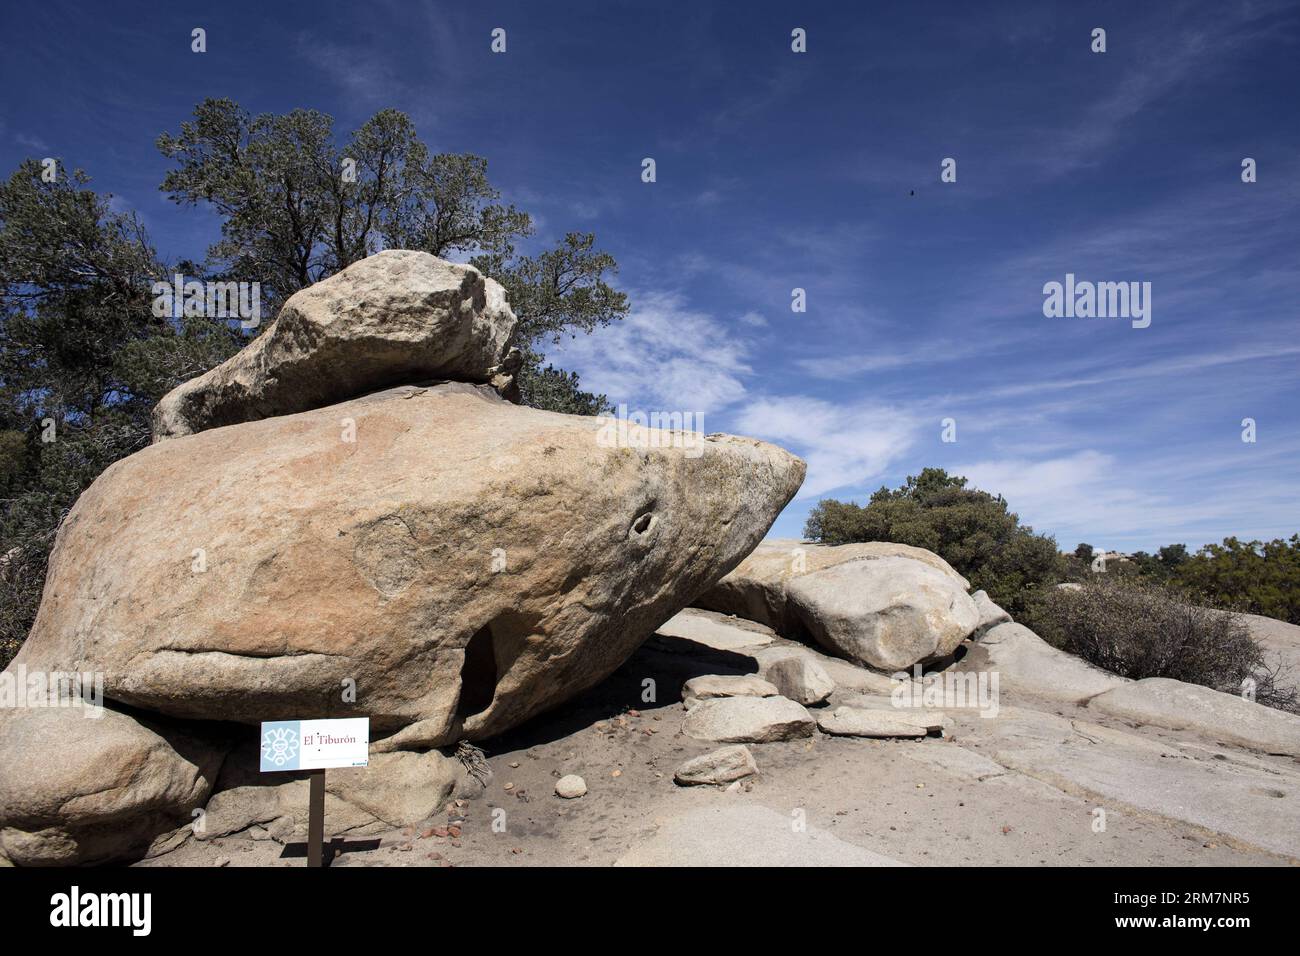 (140311) -- BAJA CALIFORNIA, (Xinhua) -- Image taken on March 9, 2014 shows the rock exterior that shelters the El Tibur¨®n cave paintings in the archaelogical site of El Vallecito near La Rumorosa town Baja California, northwest of Mexico. According to the National Institute of Antropology and History (INAH, its acronym in Spanish), El Vallecito was occupied by members of the Yuman linguistic family, which originally lived in the northwest area of the state of Baja California and southern California. At the site there are rock paintings of simple lines traced with mineral dyes in white, red, Stock Photo